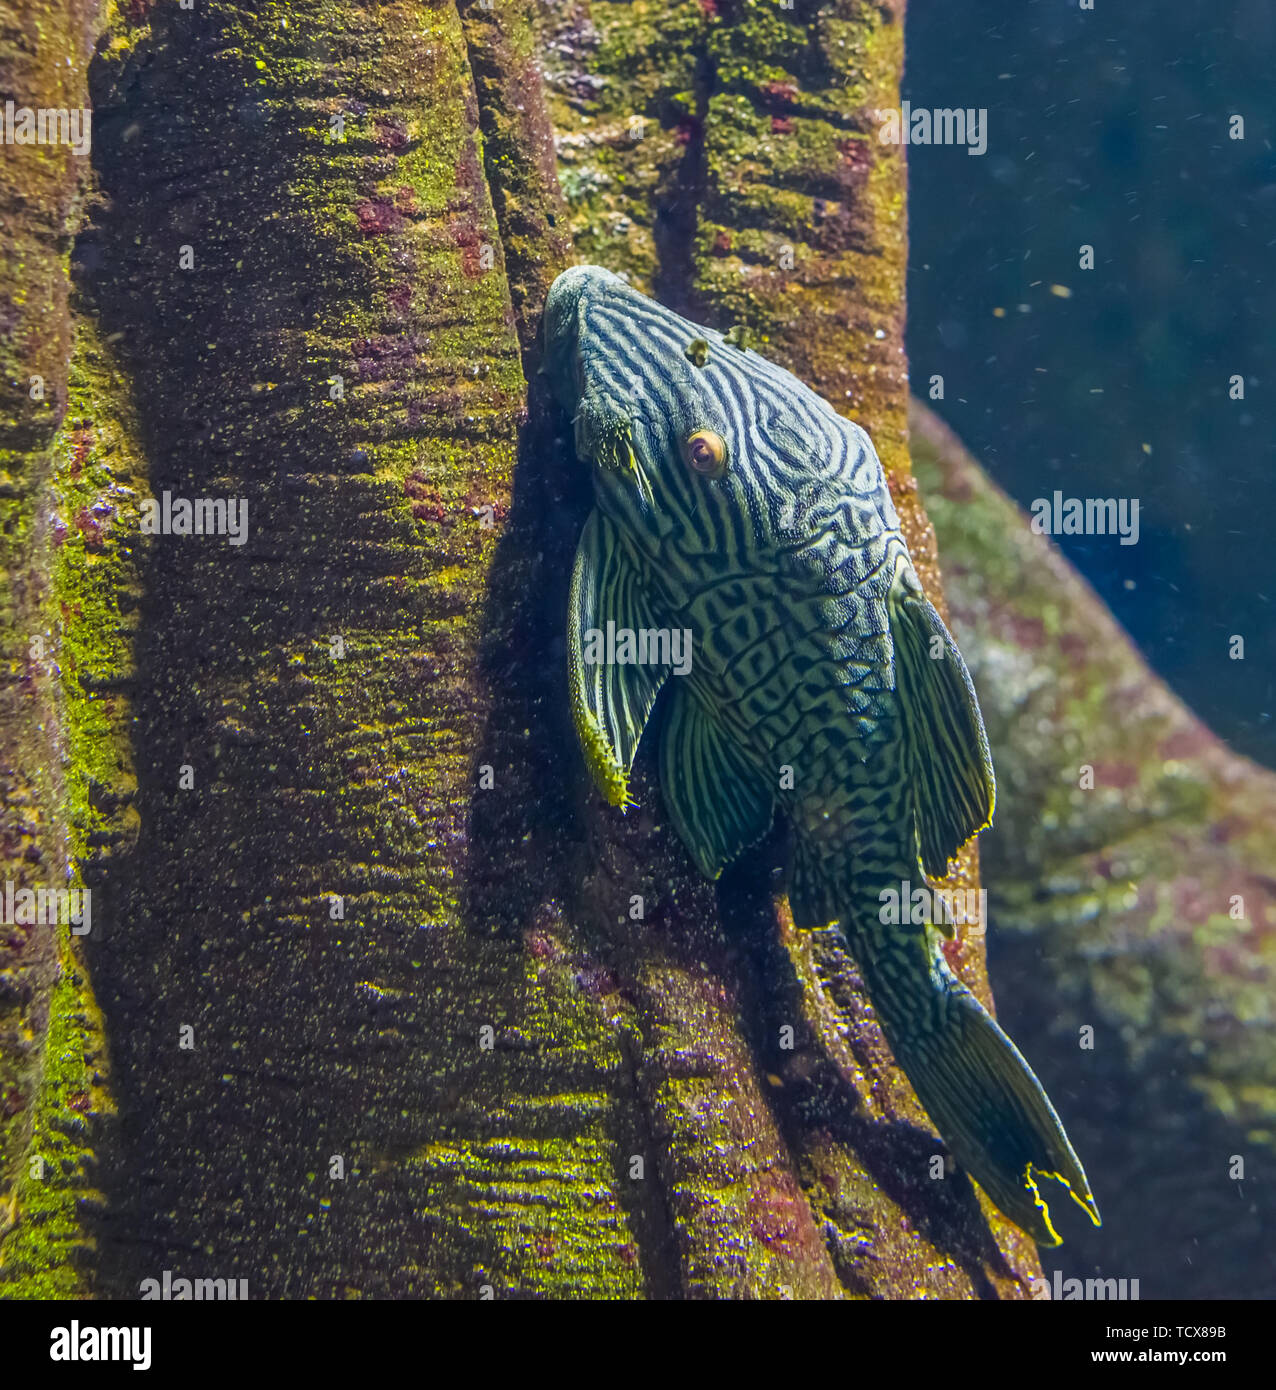 royal panaque in closeup, popular suckermouth catfish in aquaculture, Tropical fish from the Amazon basin of America Stock Photo